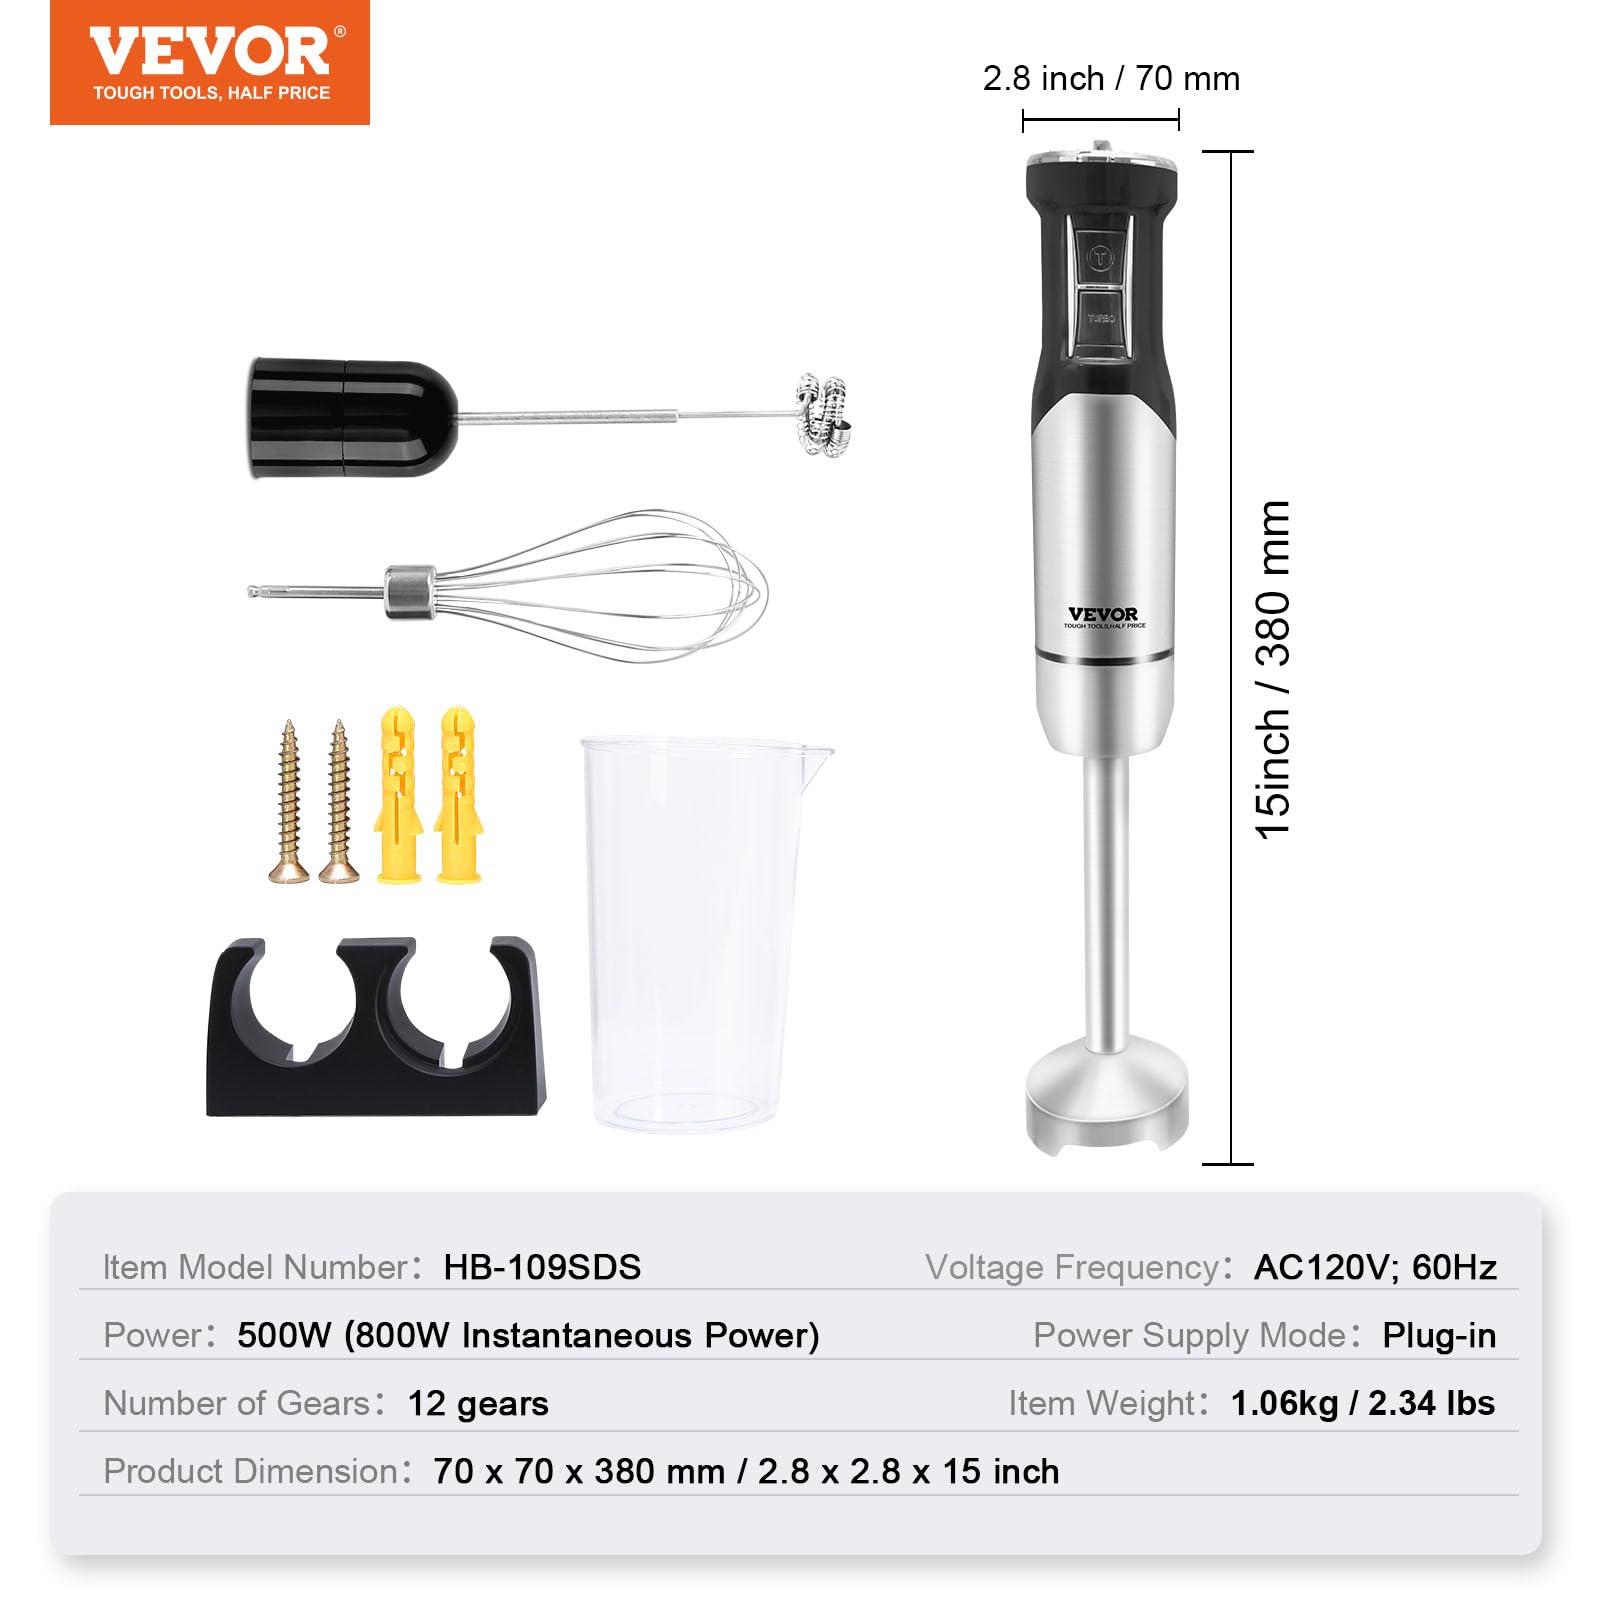 VEVOR Commercial Immersion Blender, 12-Speed Heavy Duty Immersion Blender, Stainless Steel Blade Copper Motor Hand Mixer, Portable Mixer with Measuring Cup, Whisk, Milk Frother, Silver